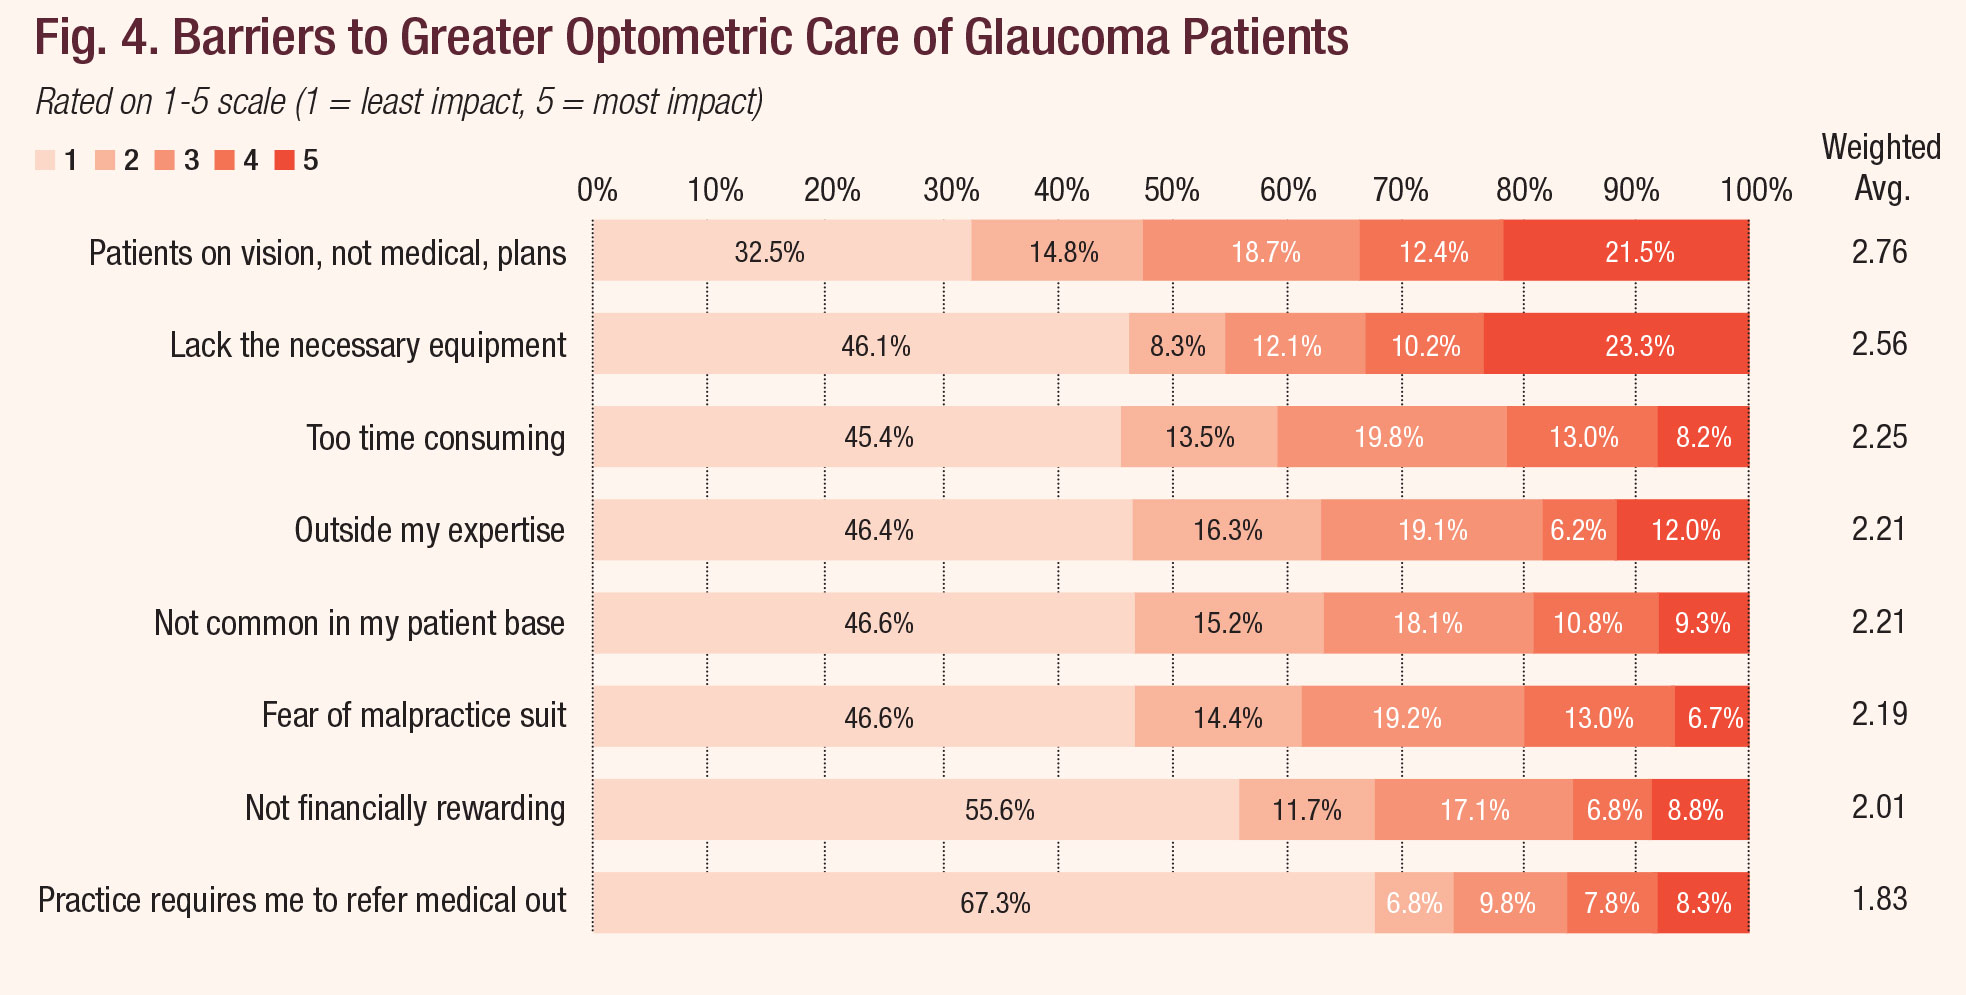 Barriers to Greater Optometric Care of Glaucoma Patients.